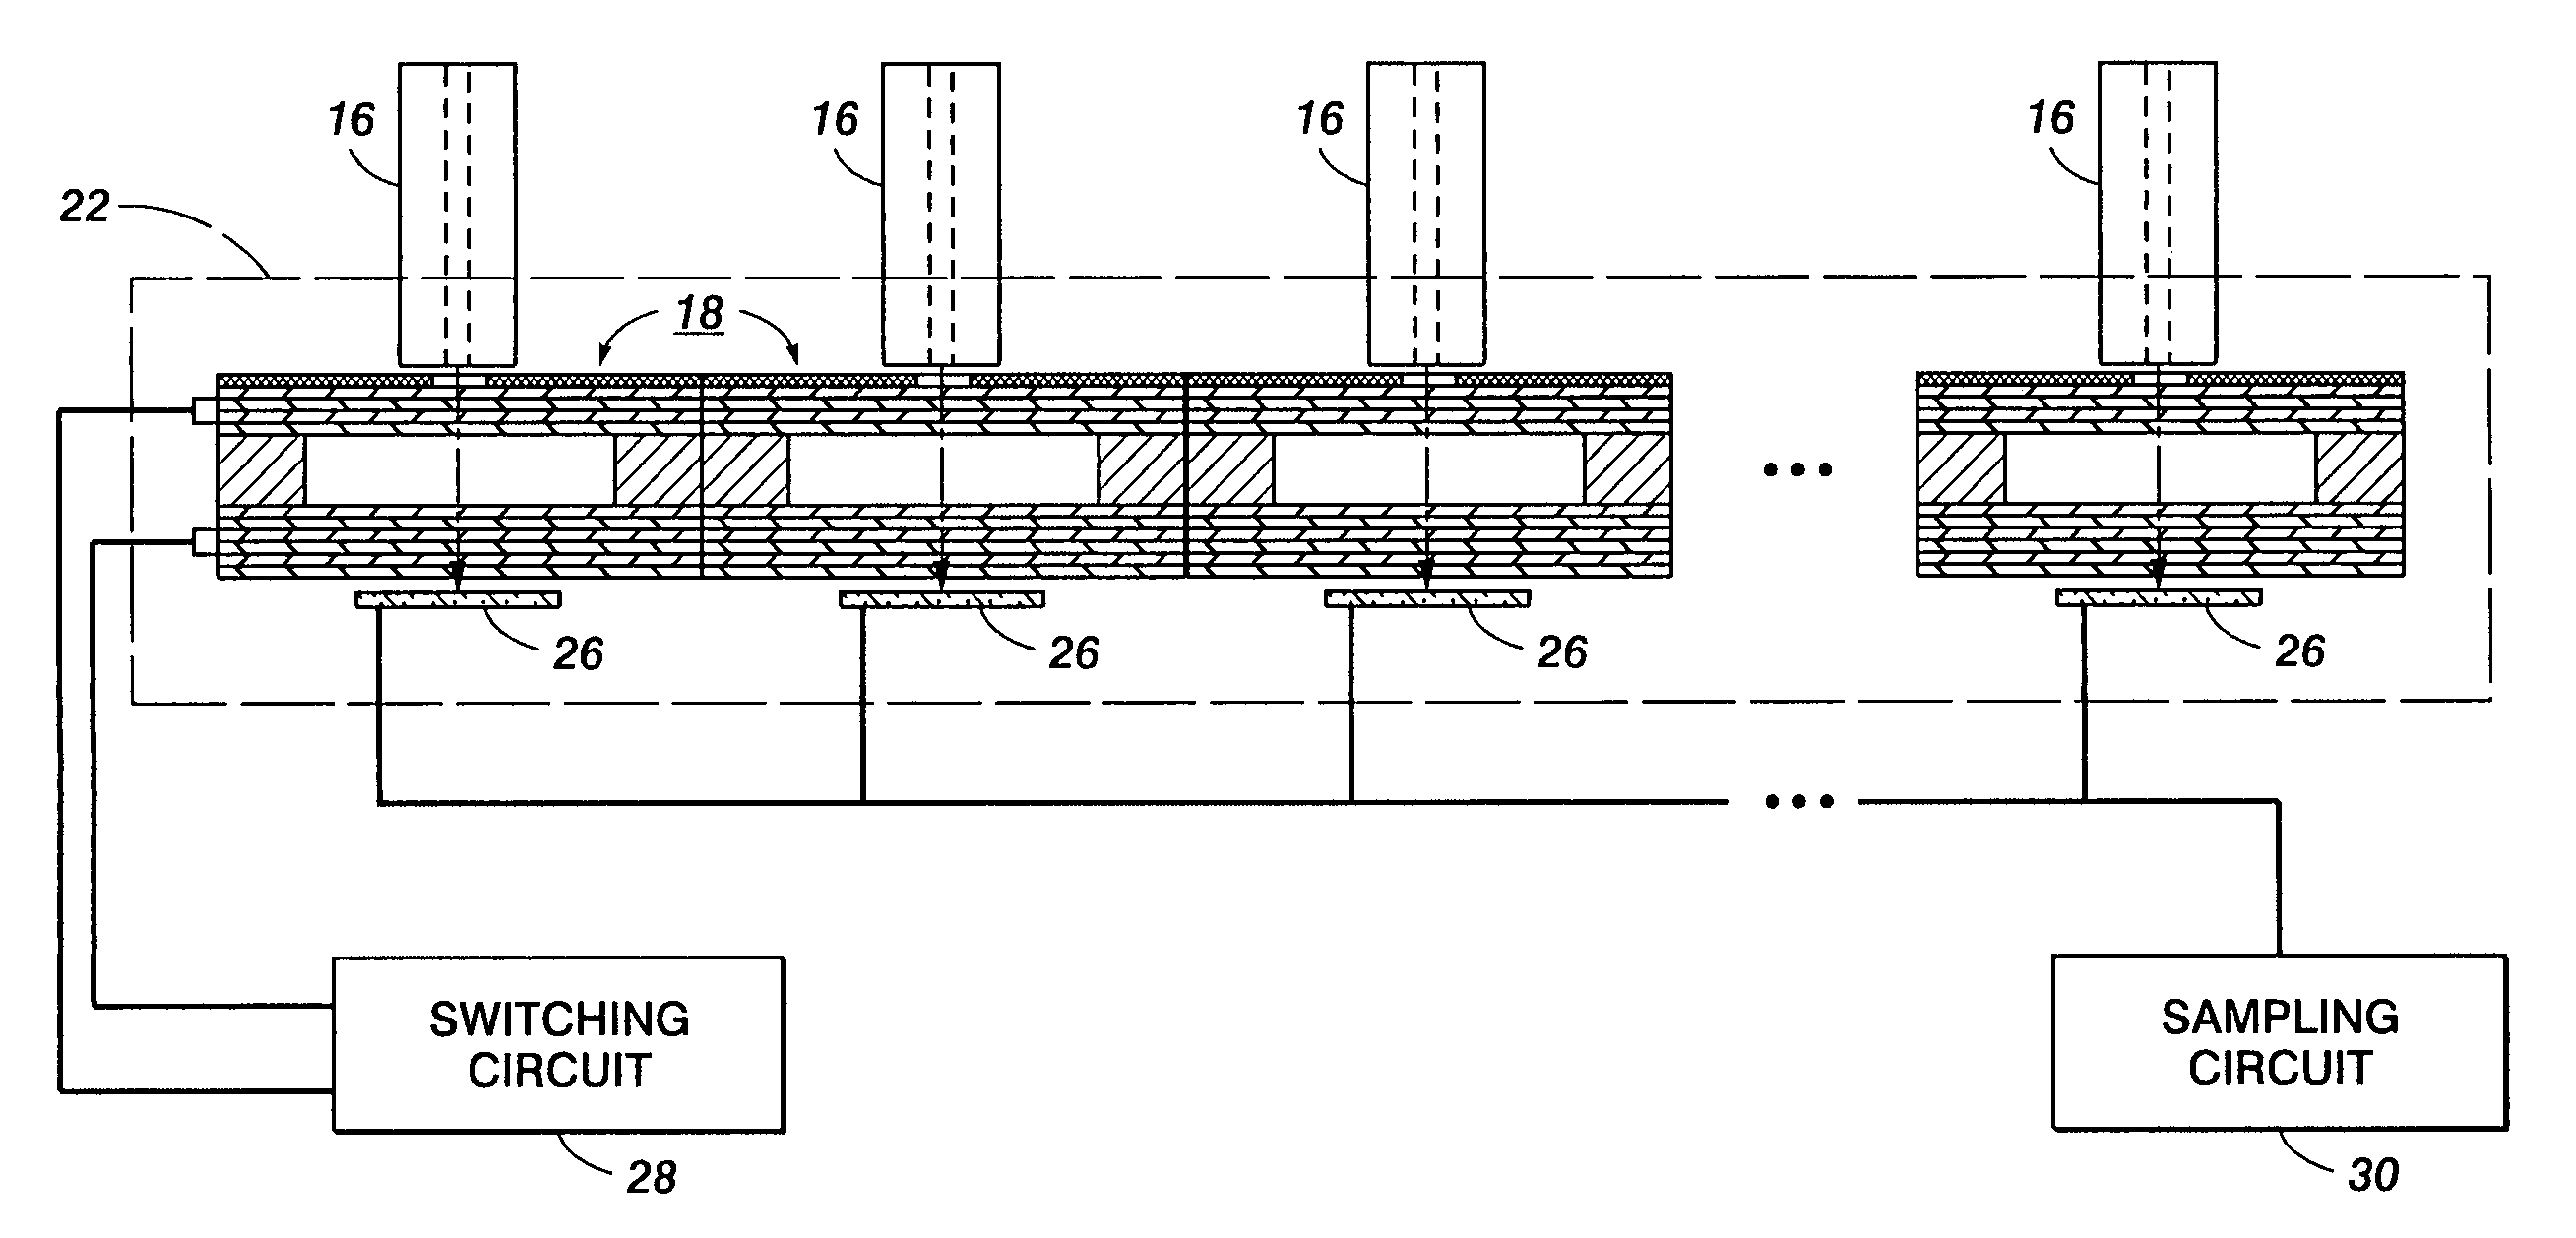 Full width array mechanically tunable spectrophotometer